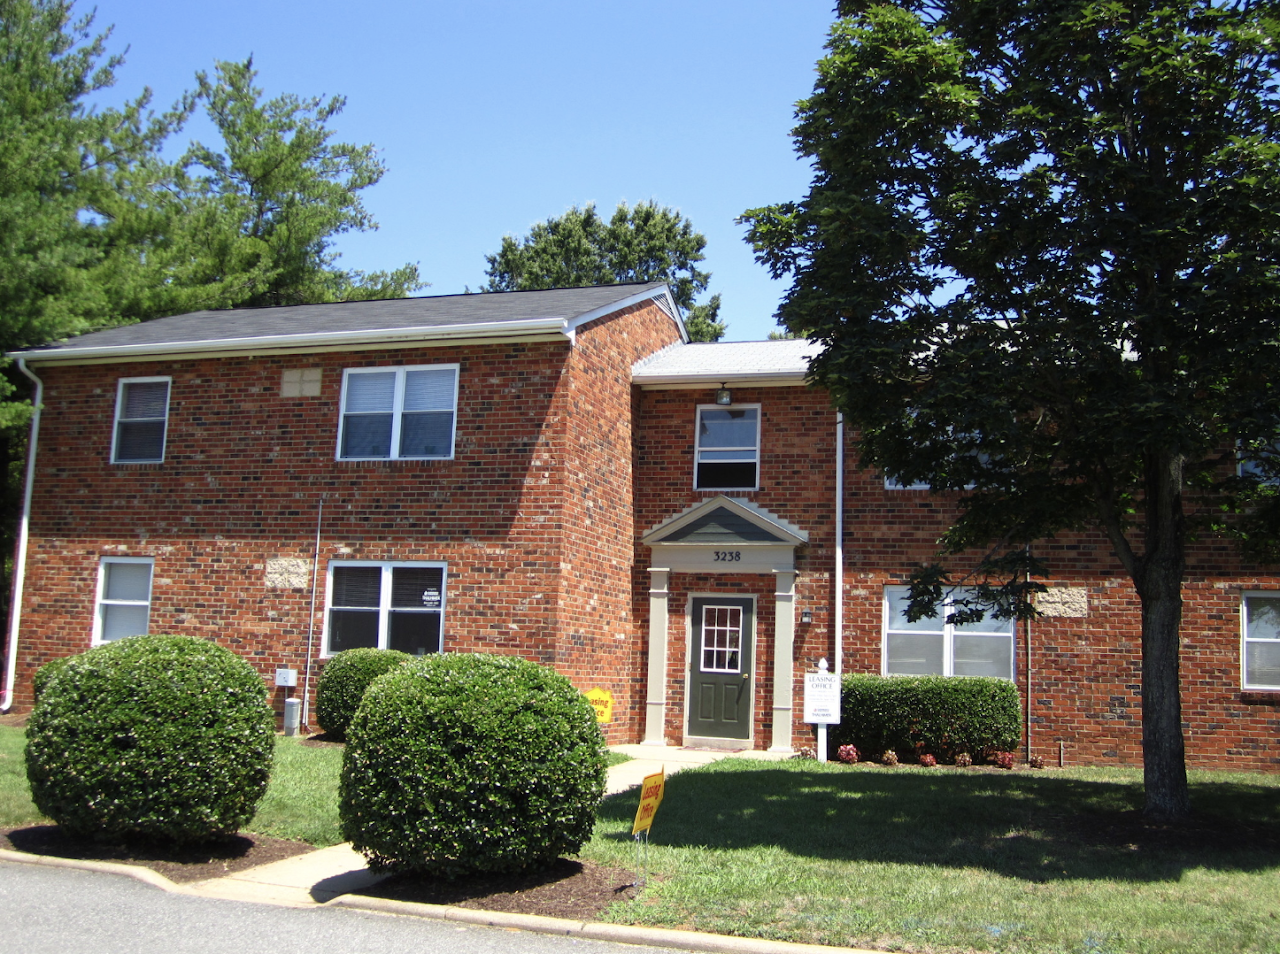 Photo of COUNTRYSIDE (RICHMOND). Affordable housing located at 3238 BROAD ROCK BLVD RICHMOND, VA 23224